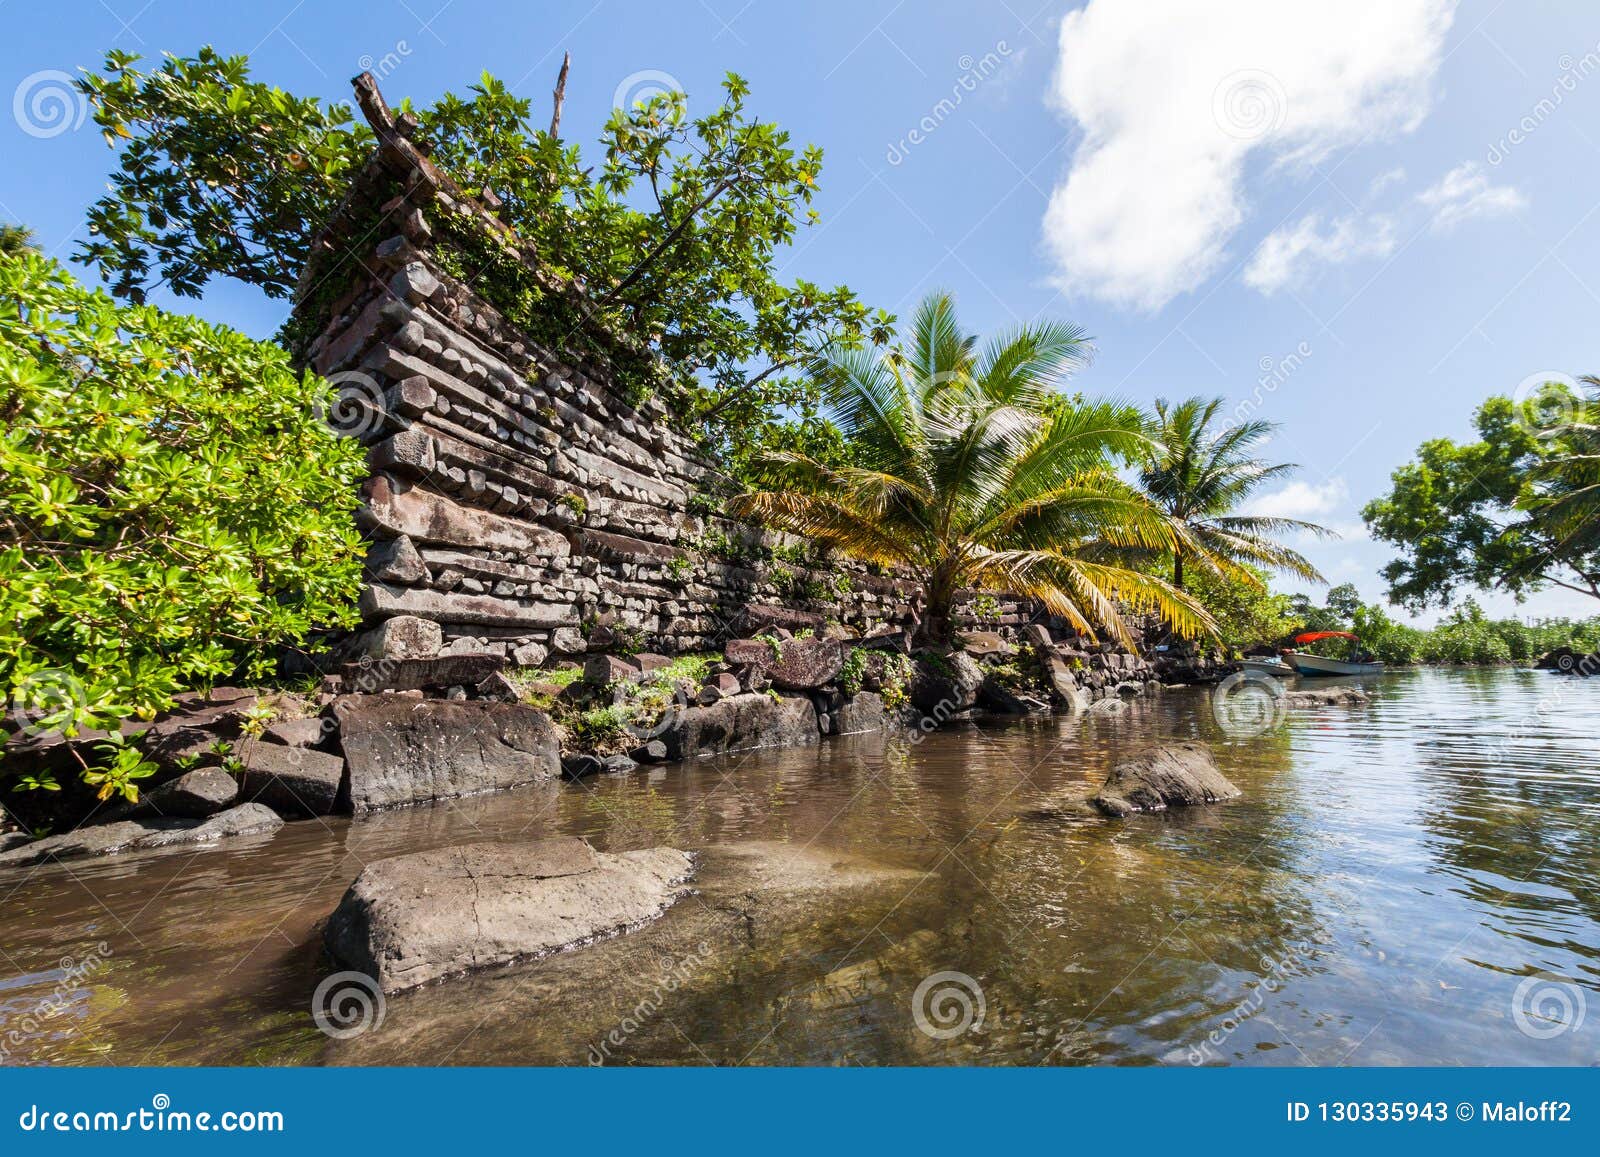 a channel and town walls in nan madol - prehistoric ruined stone city. pohnpei, micronesia, oceania.